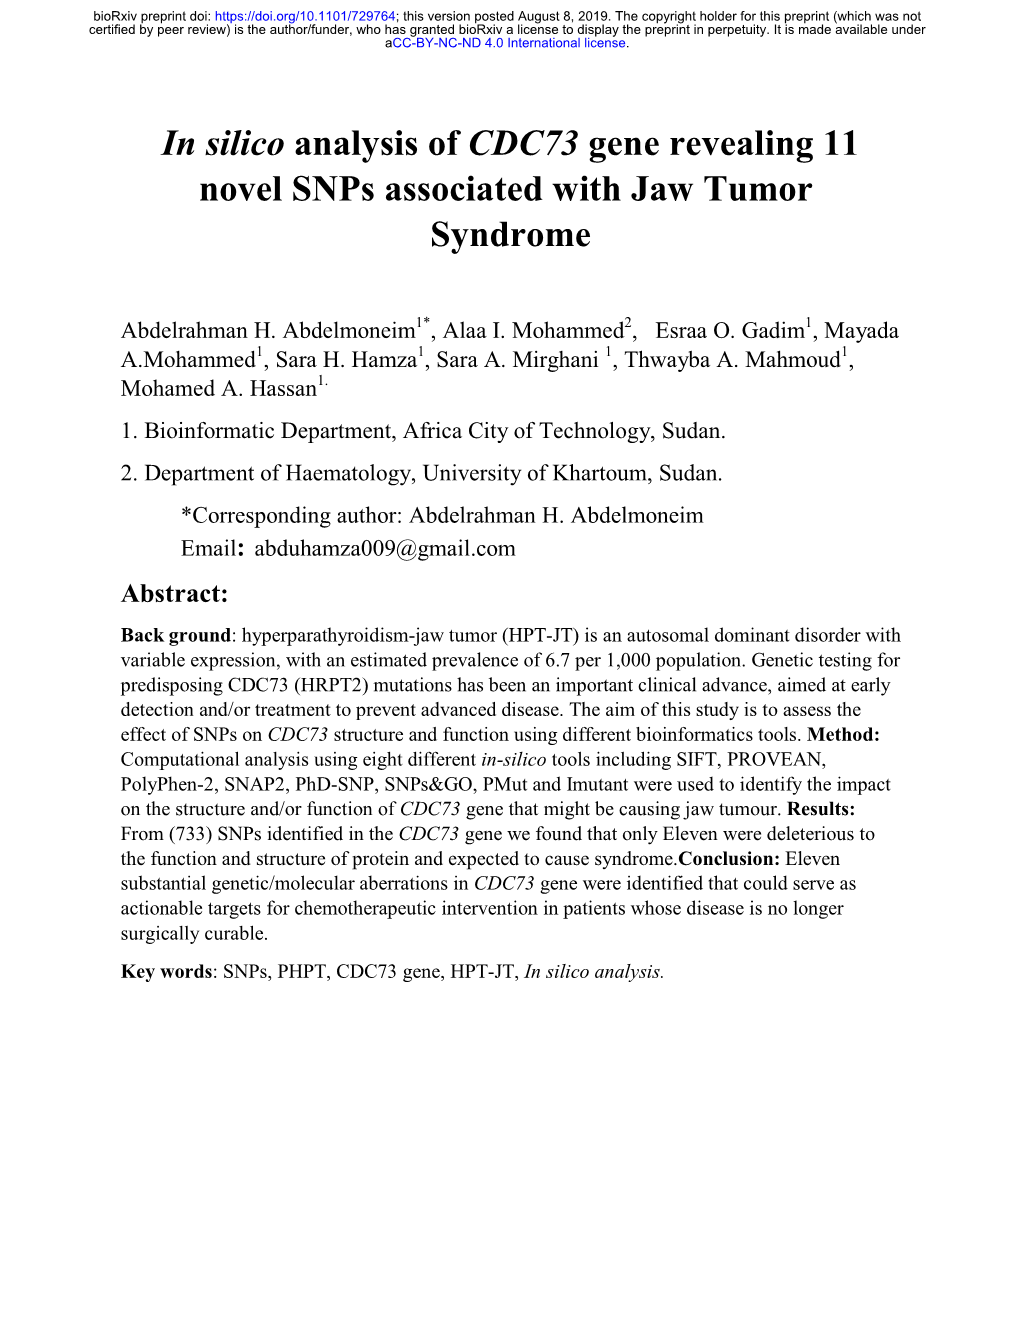 In Silico Analysis of CDC73 Gene Revealing 11 Novel Snps Associated with Jaw Tumor Syndrome